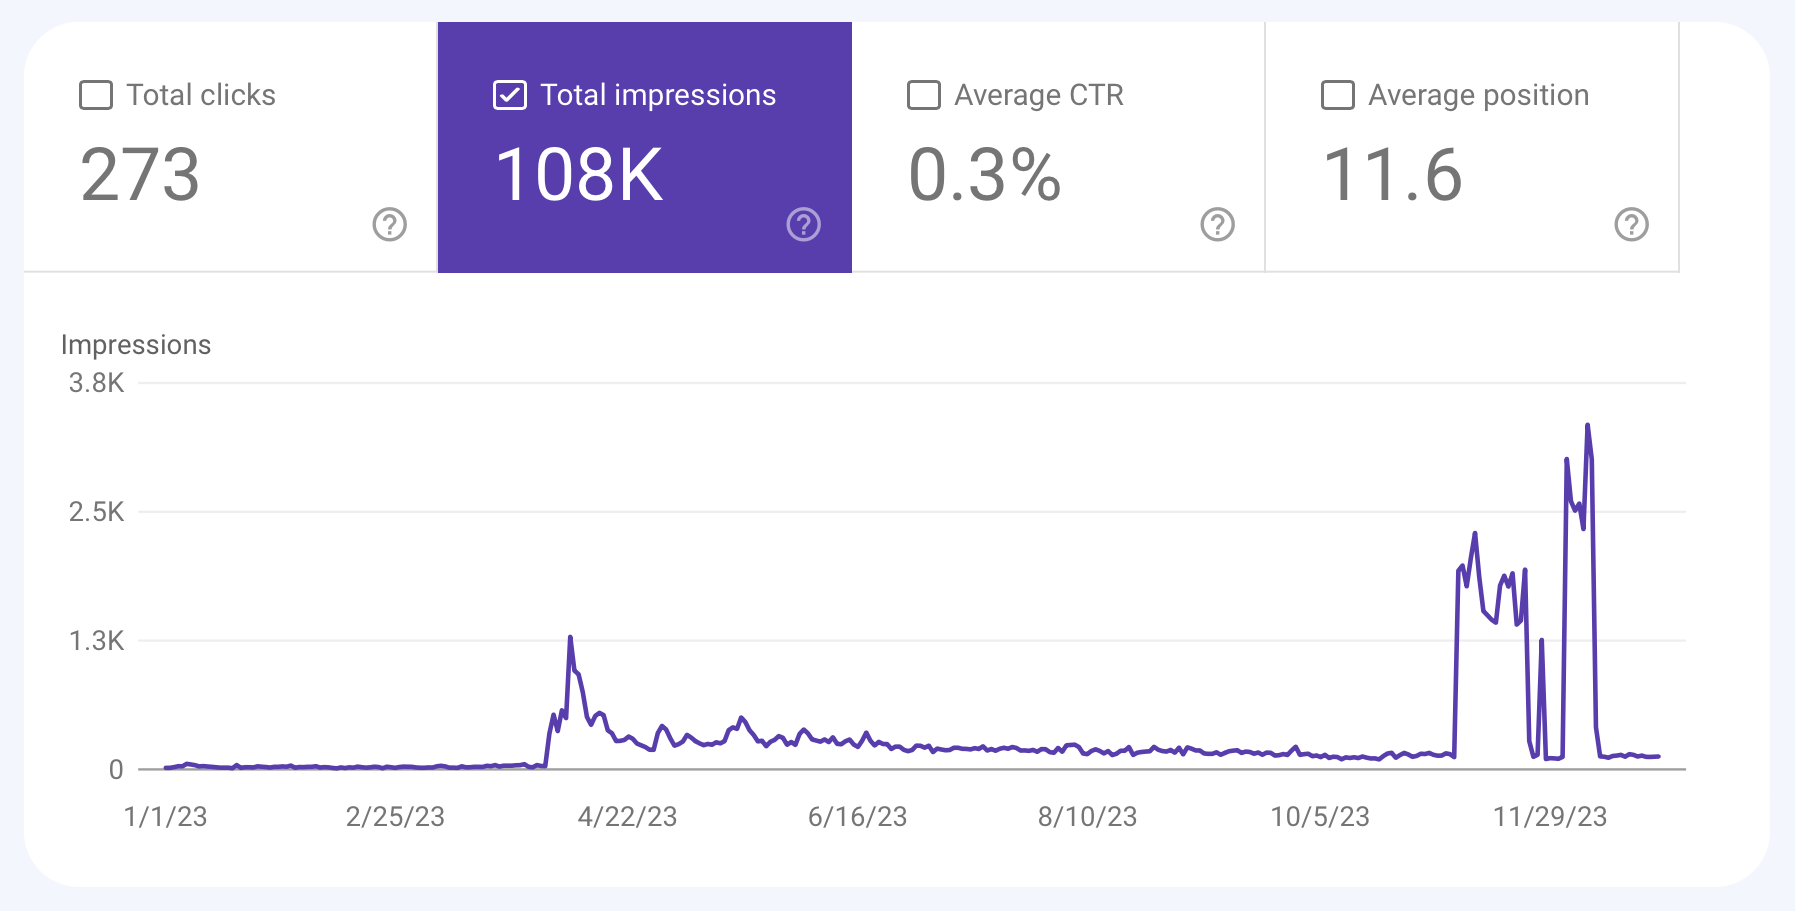 Screenshot of Google Search Console impressions data showing a timeline from January to December with total impressions marked at 108K, alongside metrics for total clicks, average click-through rate (CTR), and average position